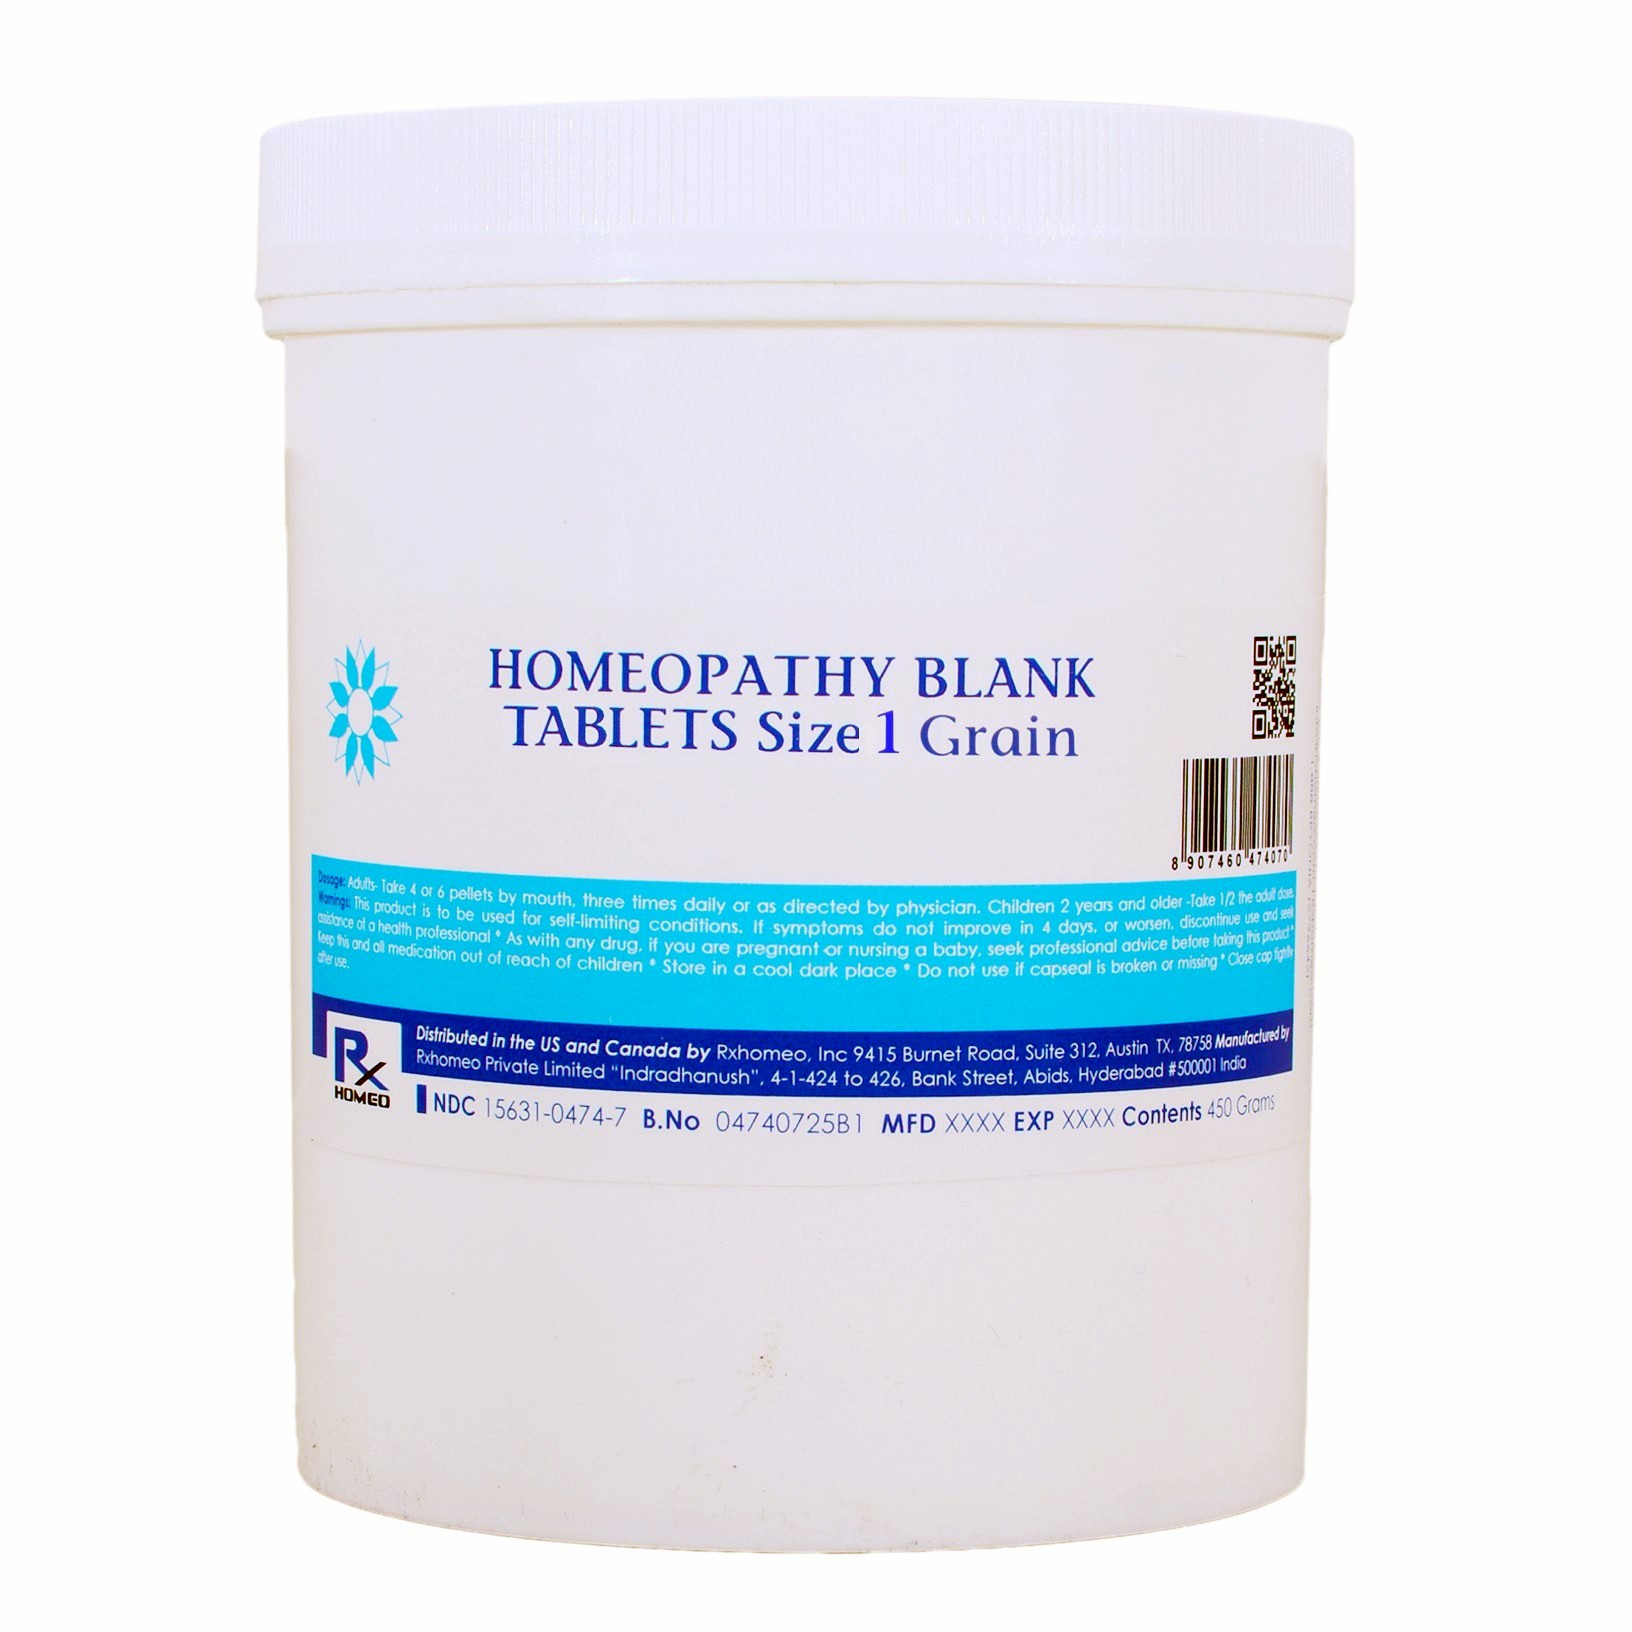 HOMEOPATHY BLANK TABLETS Size 1 Grain